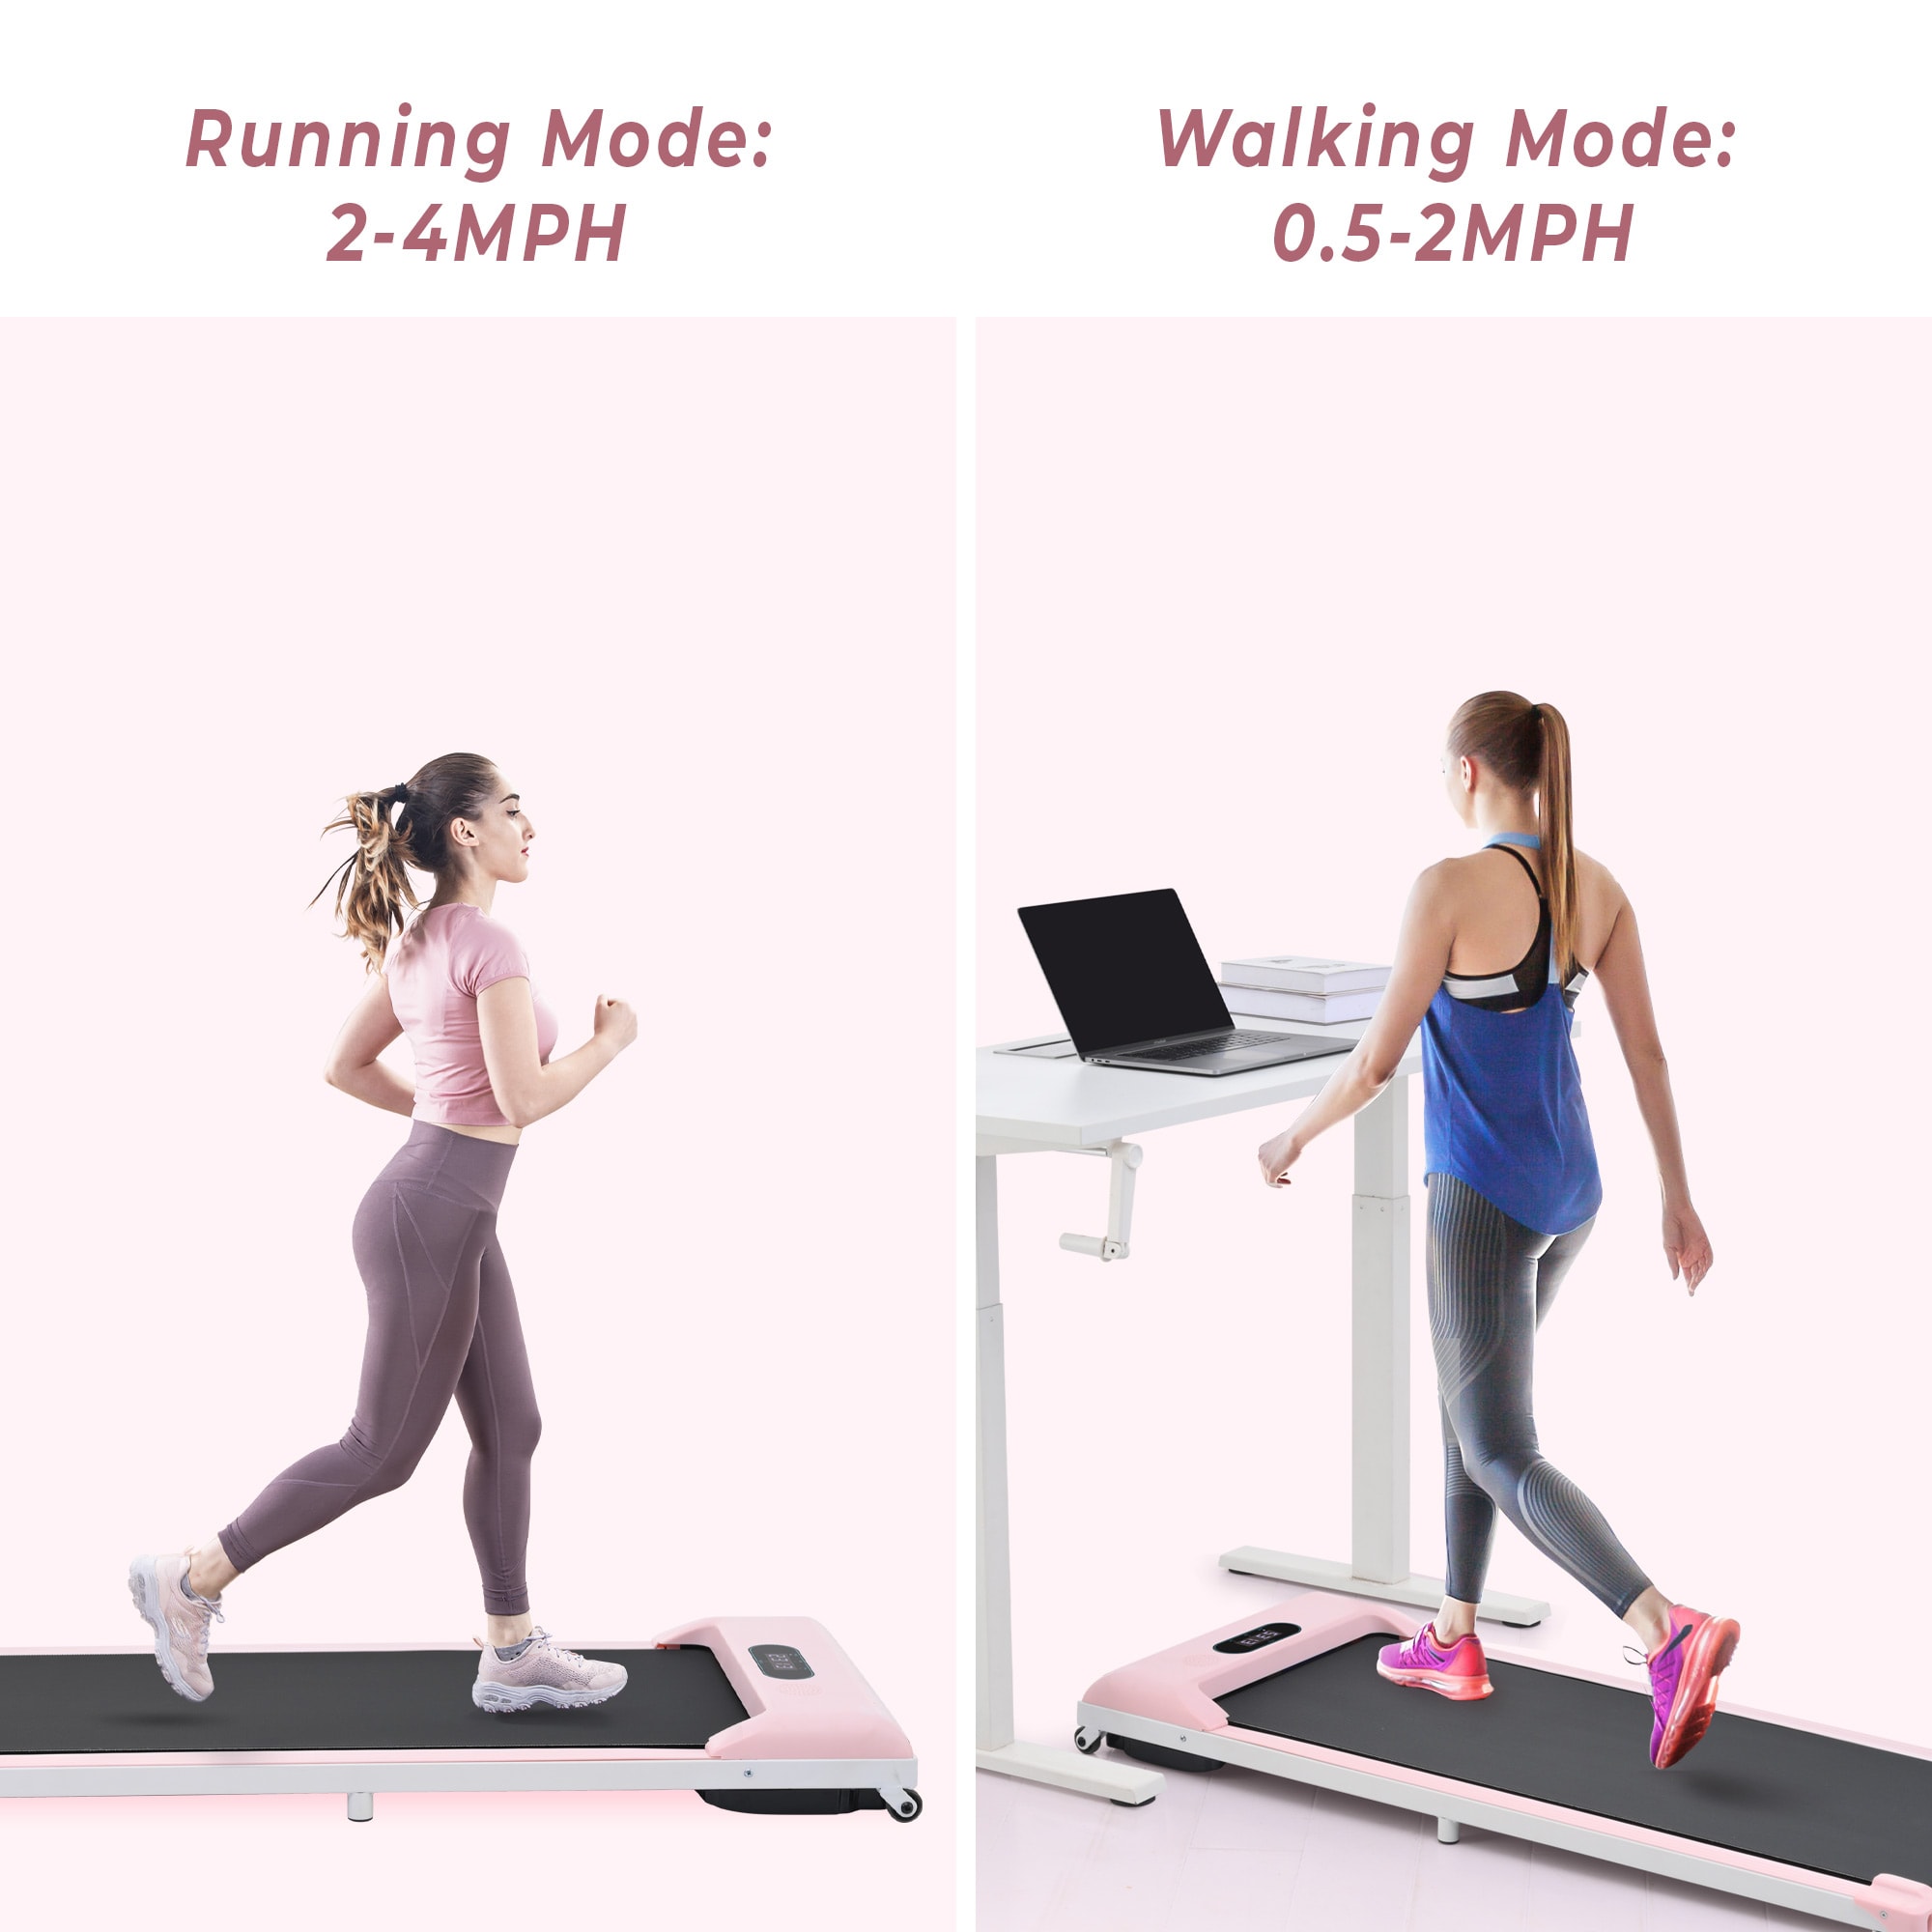 Pink Fitness & Exercise Equipment at